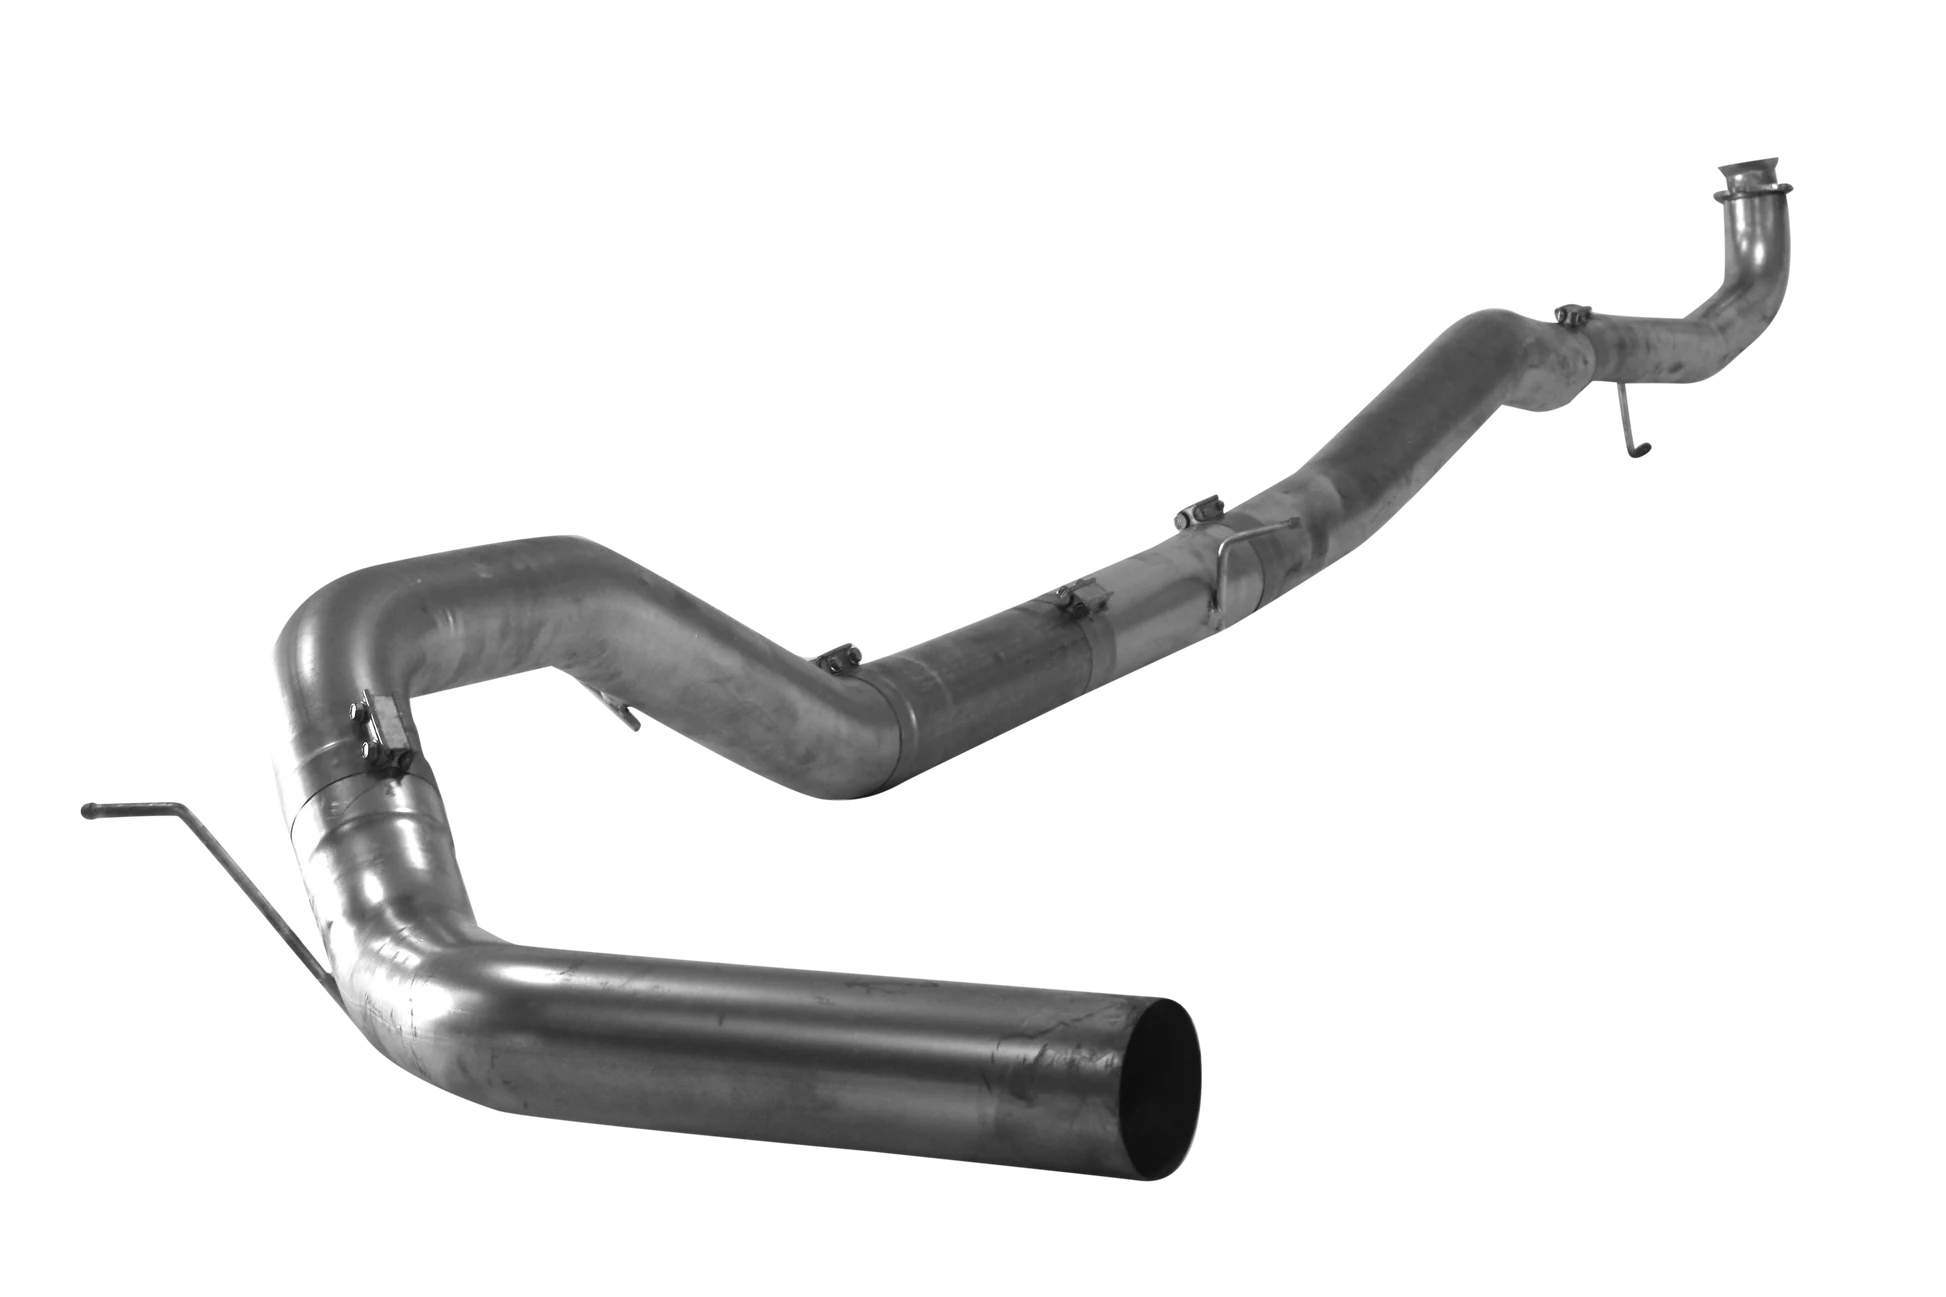 531016 531017 532016 532017 Mel's Manufacturing 5" Downpipe Back Single | 2020-2023 GM 2500/3500 6.6L DURAMAX L5P Mels Mfg FloPro Flo-Pro Flo Pro Hell On Wheels Performance Ltd Limited Canadian Owned and Operated Online Diesel Parts Distribution & Wholesale Supply Center in Alberta Canada Shipping Supplying to Alberta British Columbia Sask Saskatchewan Manitoba Ontario Quebec Newfoundland Labrador New Brunswick Nova Scotia Prince Edward Island AB BC SK MB ON QC PQ NS NB NFLD N.L. PEI